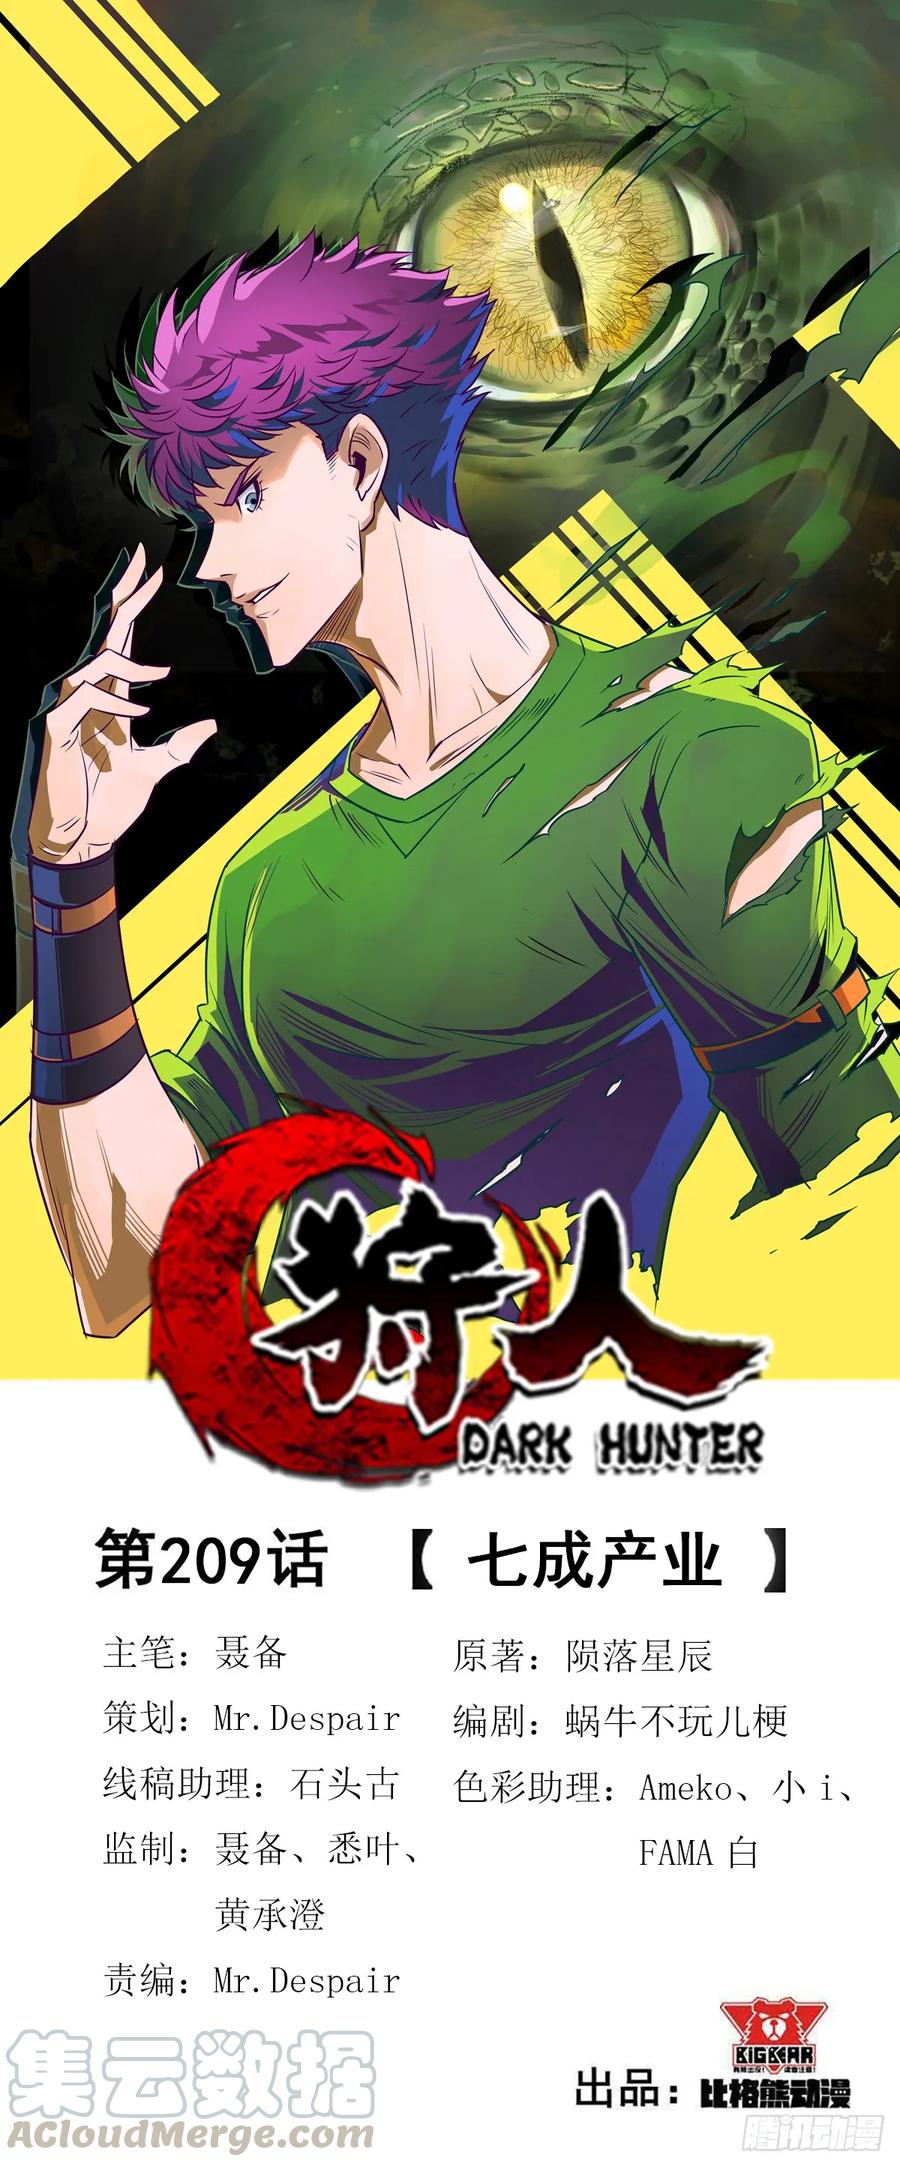 The Hunter Chapter 209